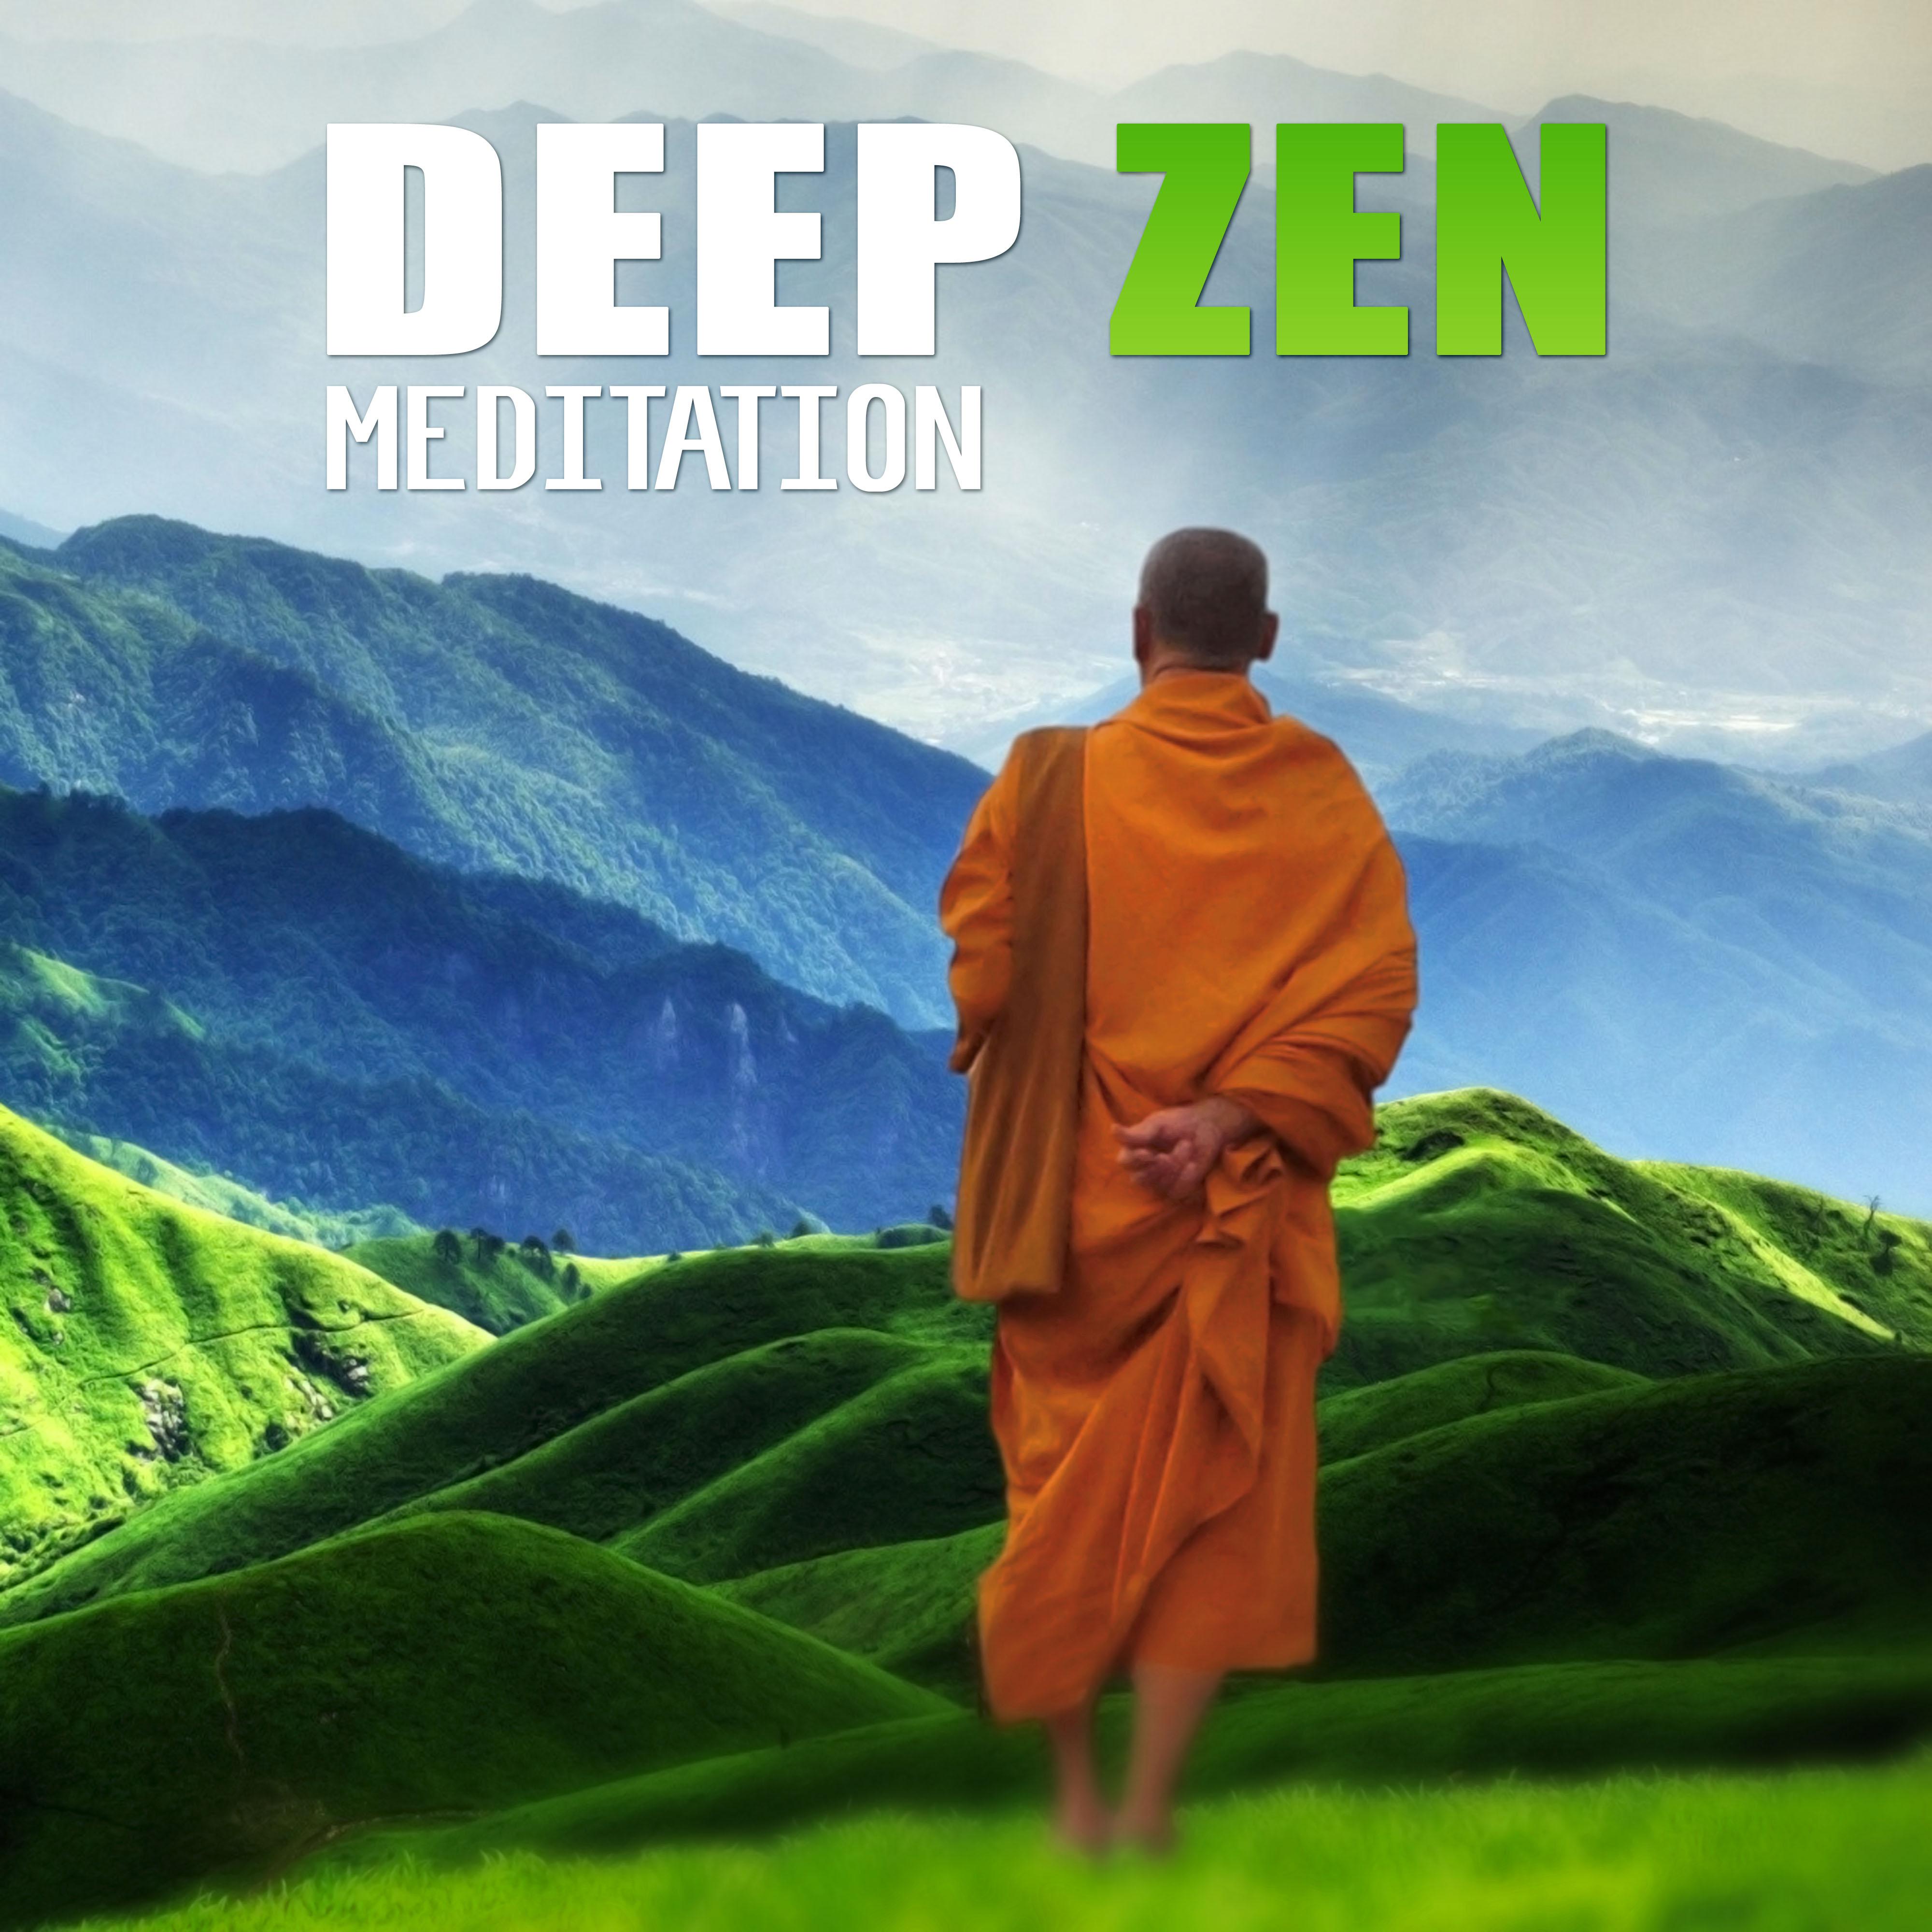 Deep Zen Meditation – New Age, Stress Relief, Soft Nature Sound, Peaceful Music Meditation, Calm Music for Ralaxation